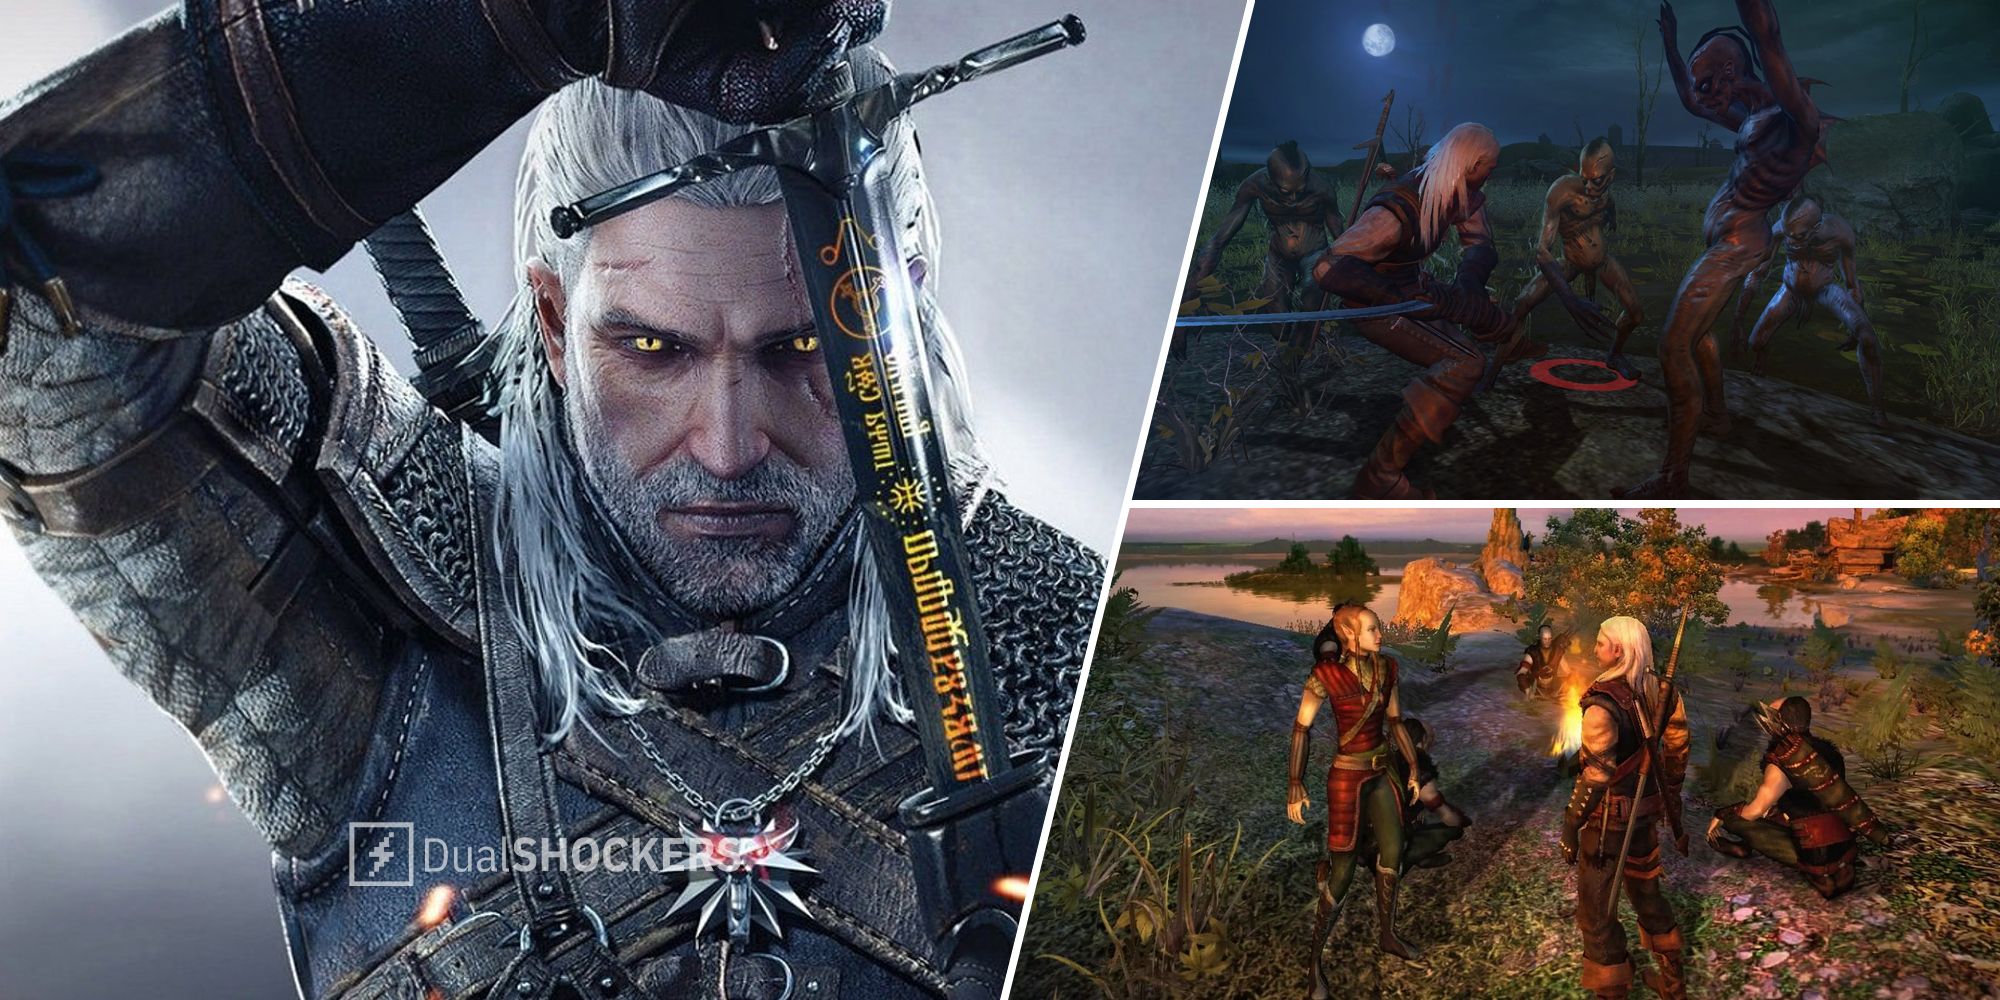 The Witcher Geralt of Rivia, The Witcher gameplay and battle